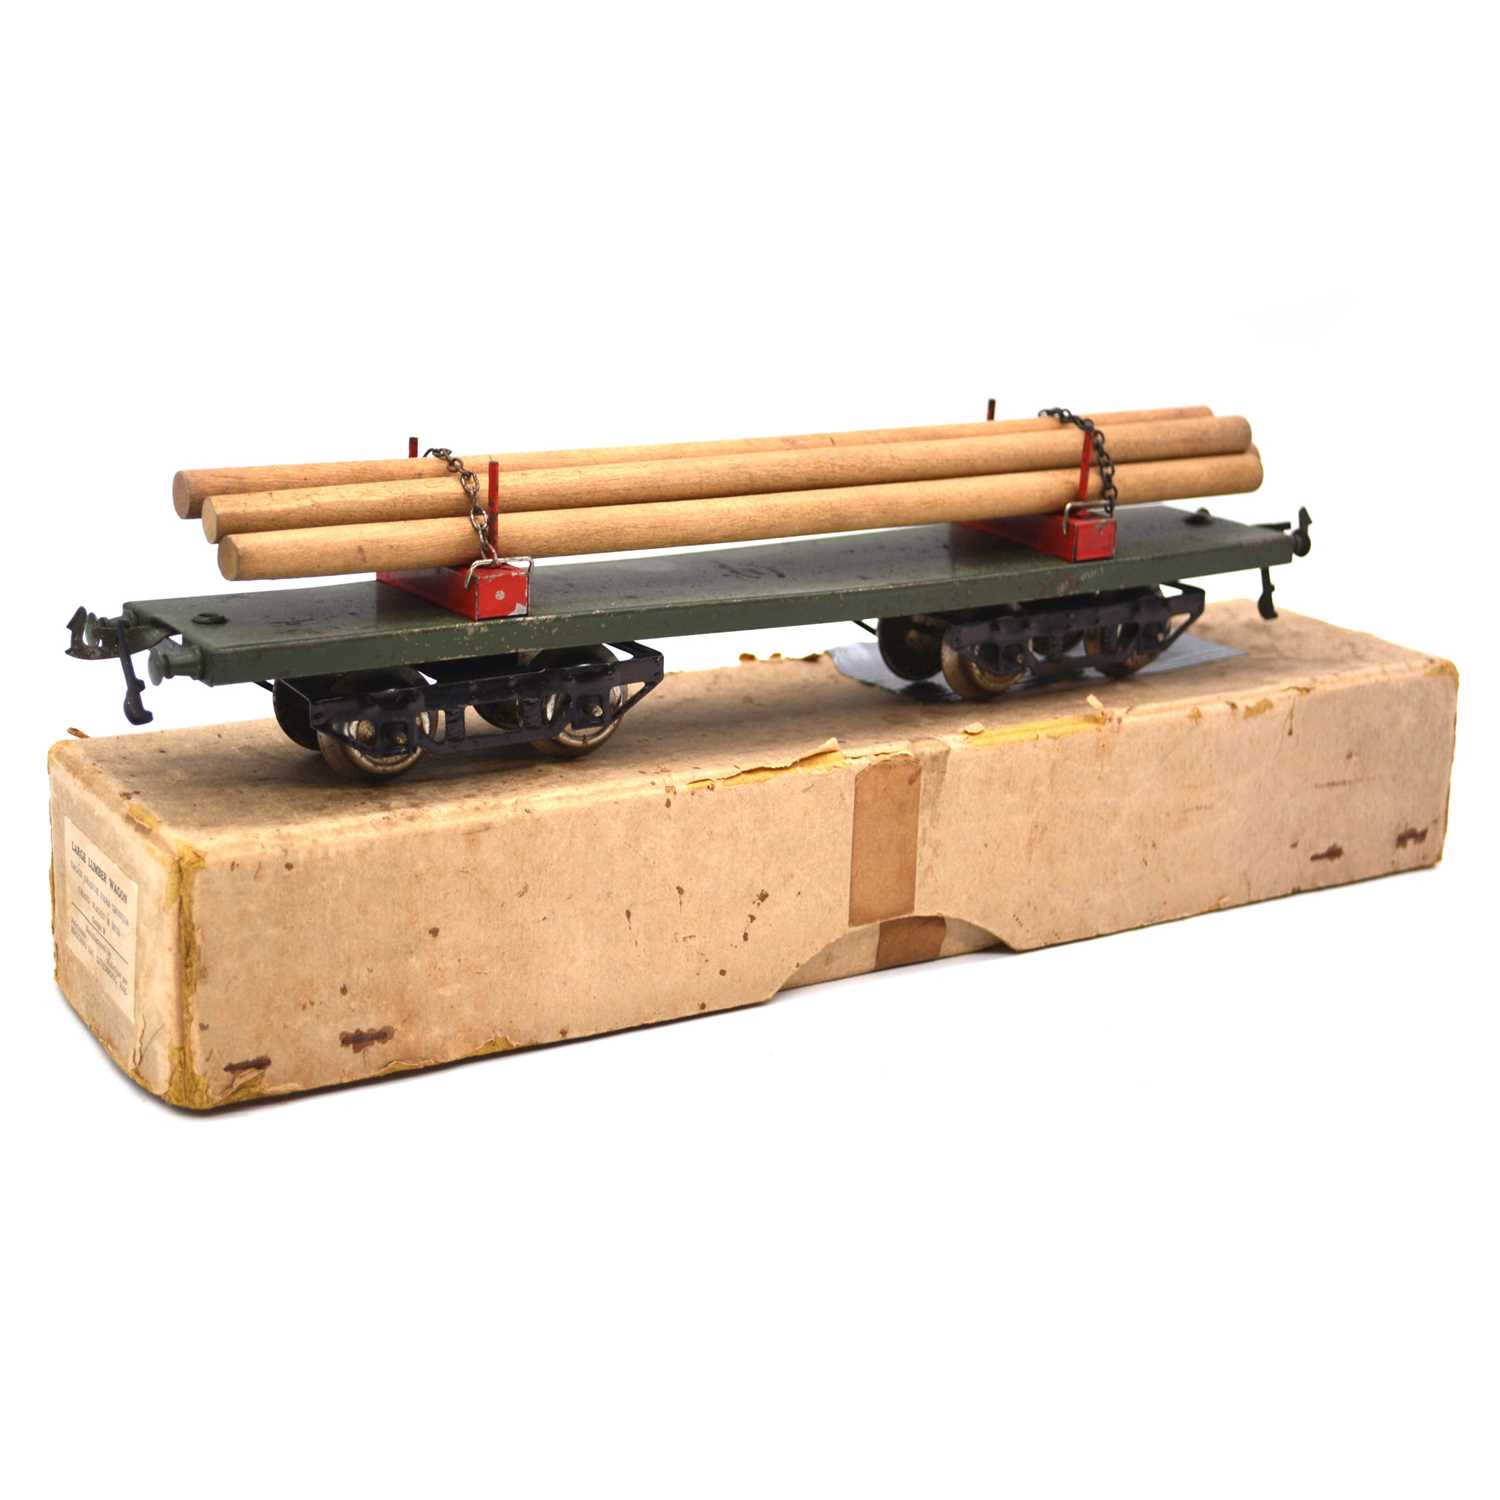 Lot 142 - Hornby O gauge model railway large lumber wagon, pre-war, made for the French market